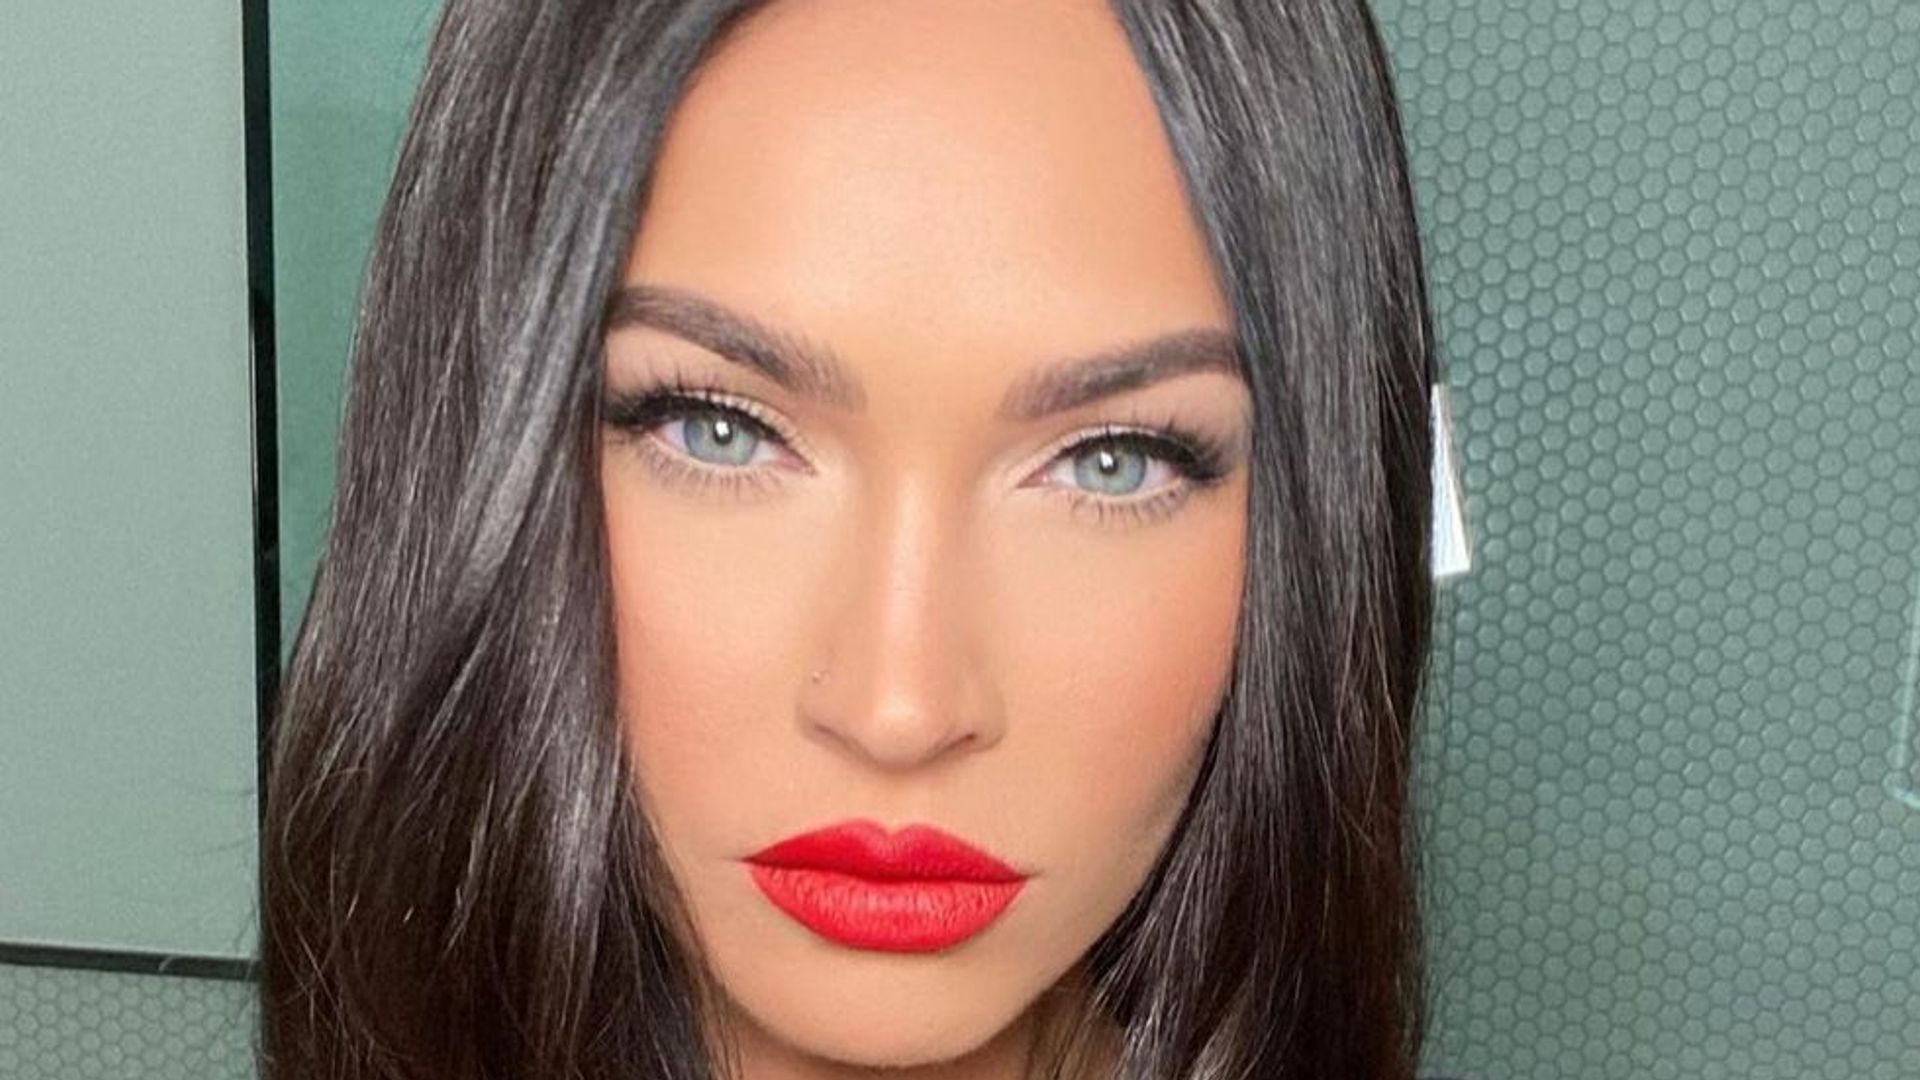 Megan Fox with straight black hair and red lipstick